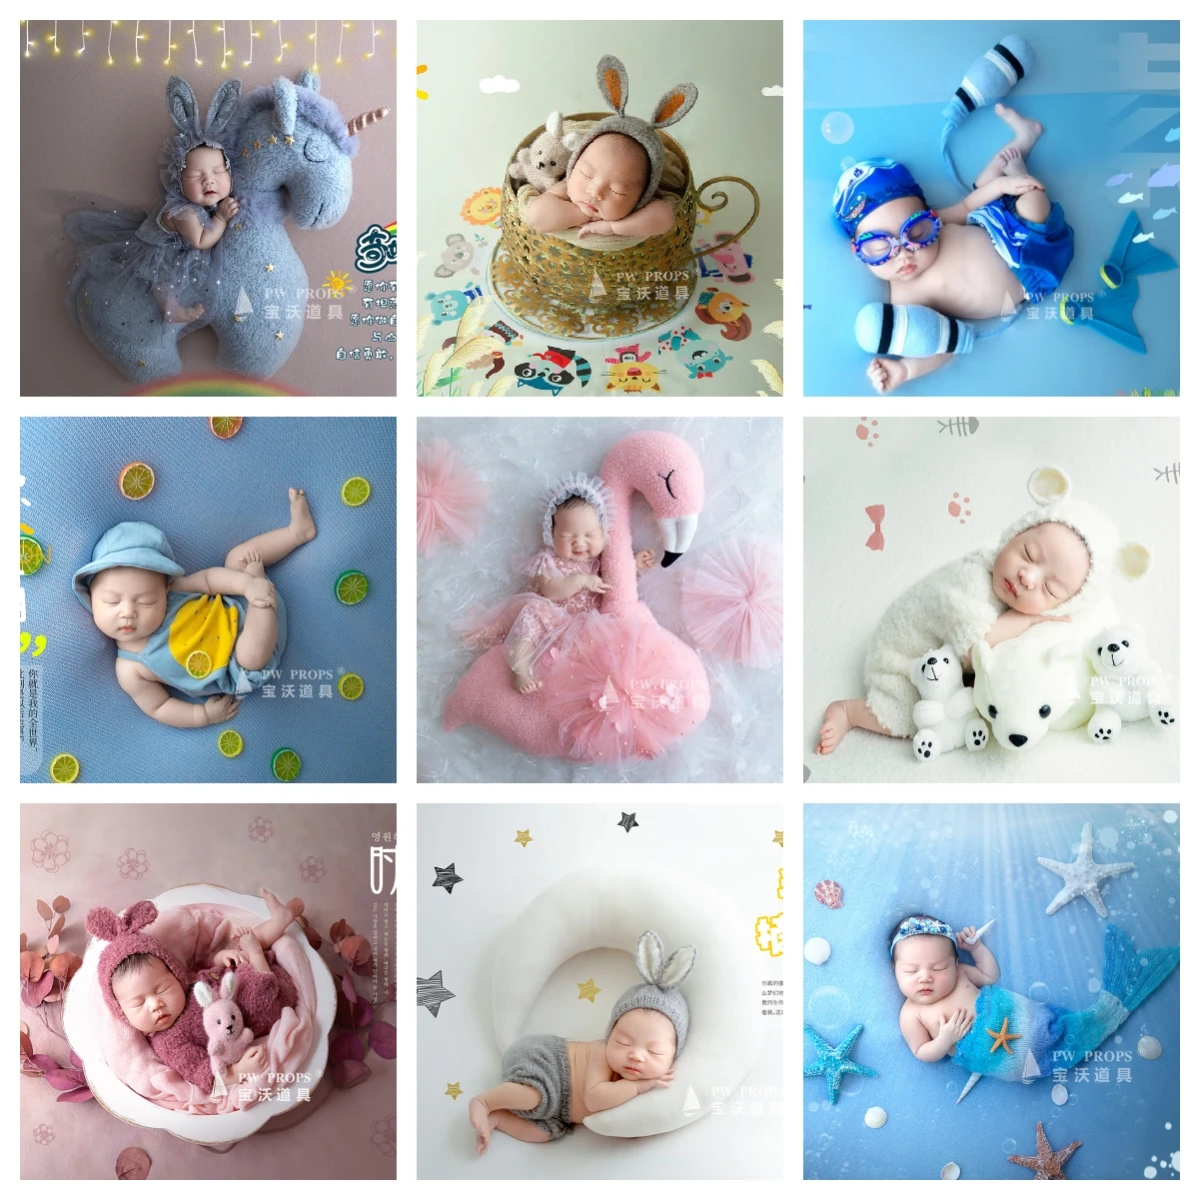 Newborn Baby Photography Props Floral Backdrop Posing Cute Animals Doll Outfits Theme Set Accessories Studio Shooting Photo Prop newborn photography props handmade wool doll mouse for baby cute animals photo shoots studio fotografia prop accessories